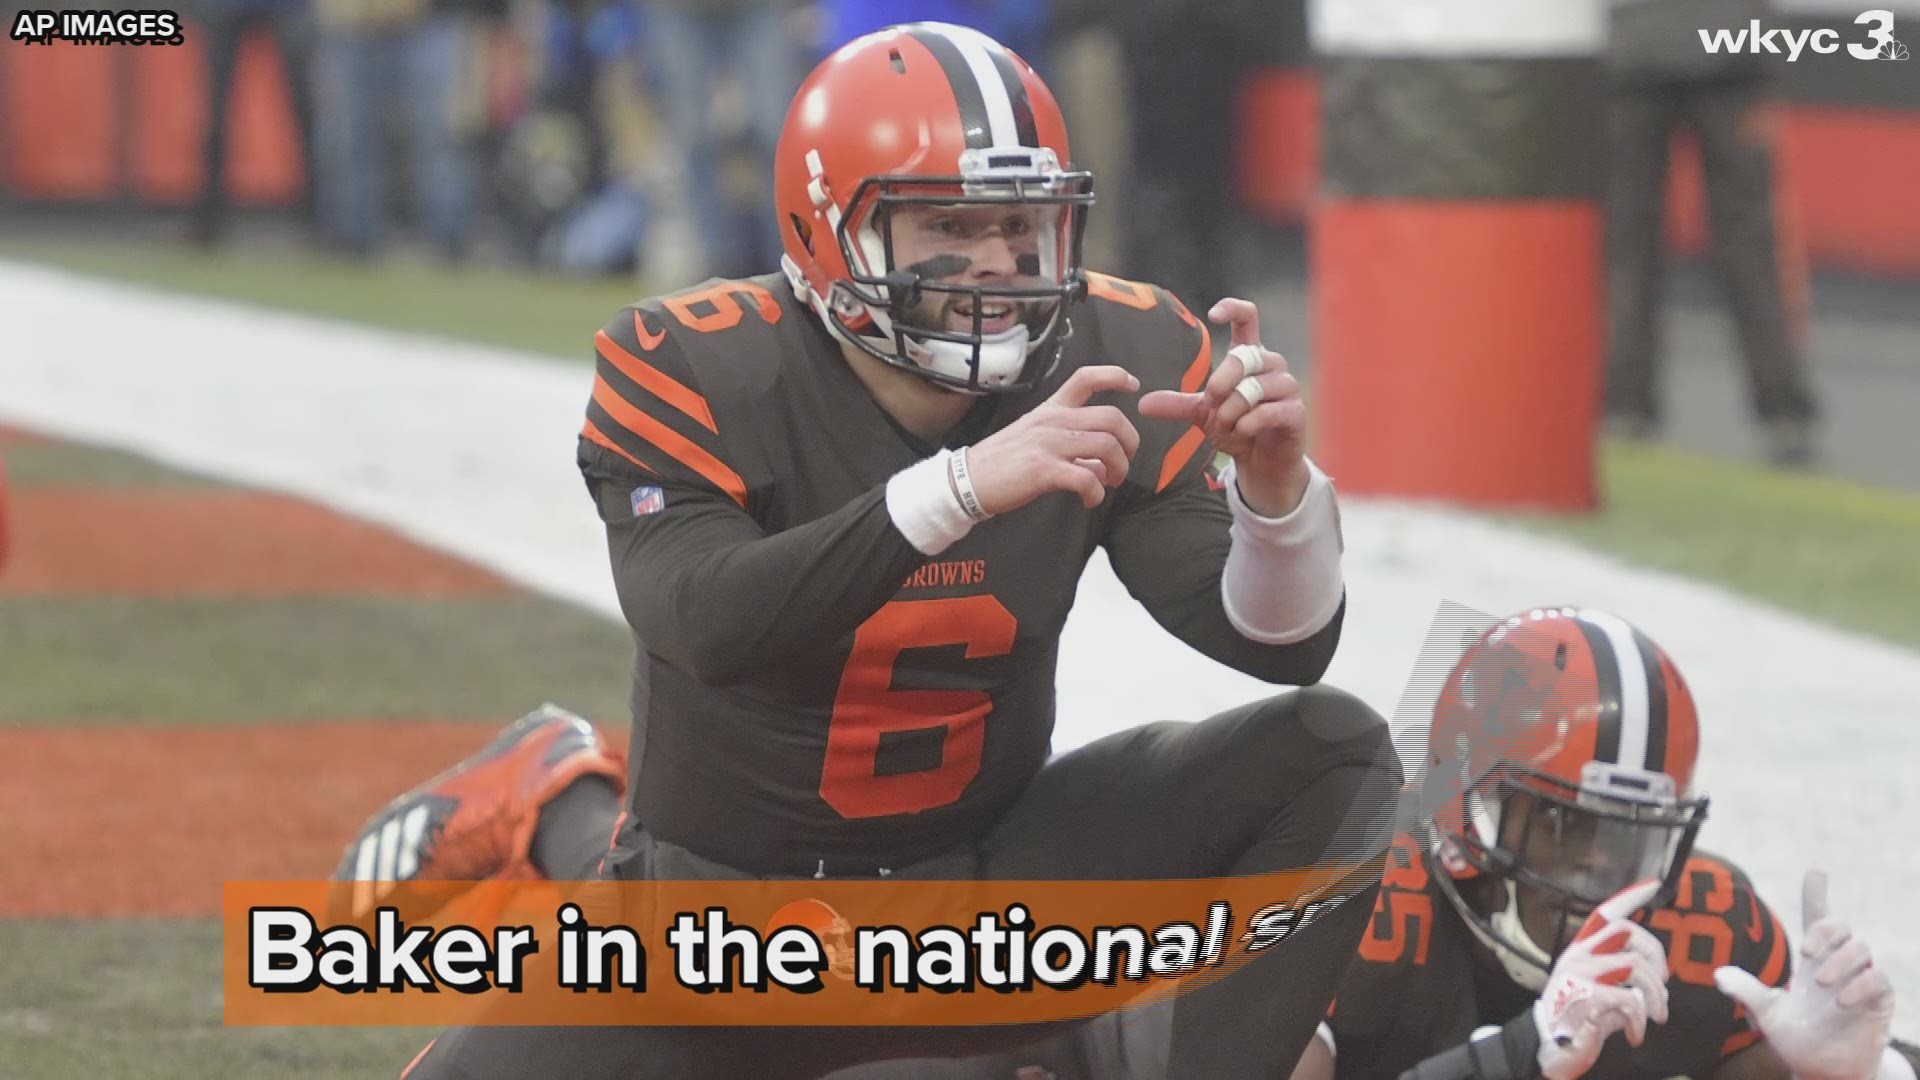 Baker in the national spotlight again!  Cleveland Browns quarterback Baker Mayfield will serve as the special guest of Monday's episode of 'Straight Up Steve Austin' on the USA Network.